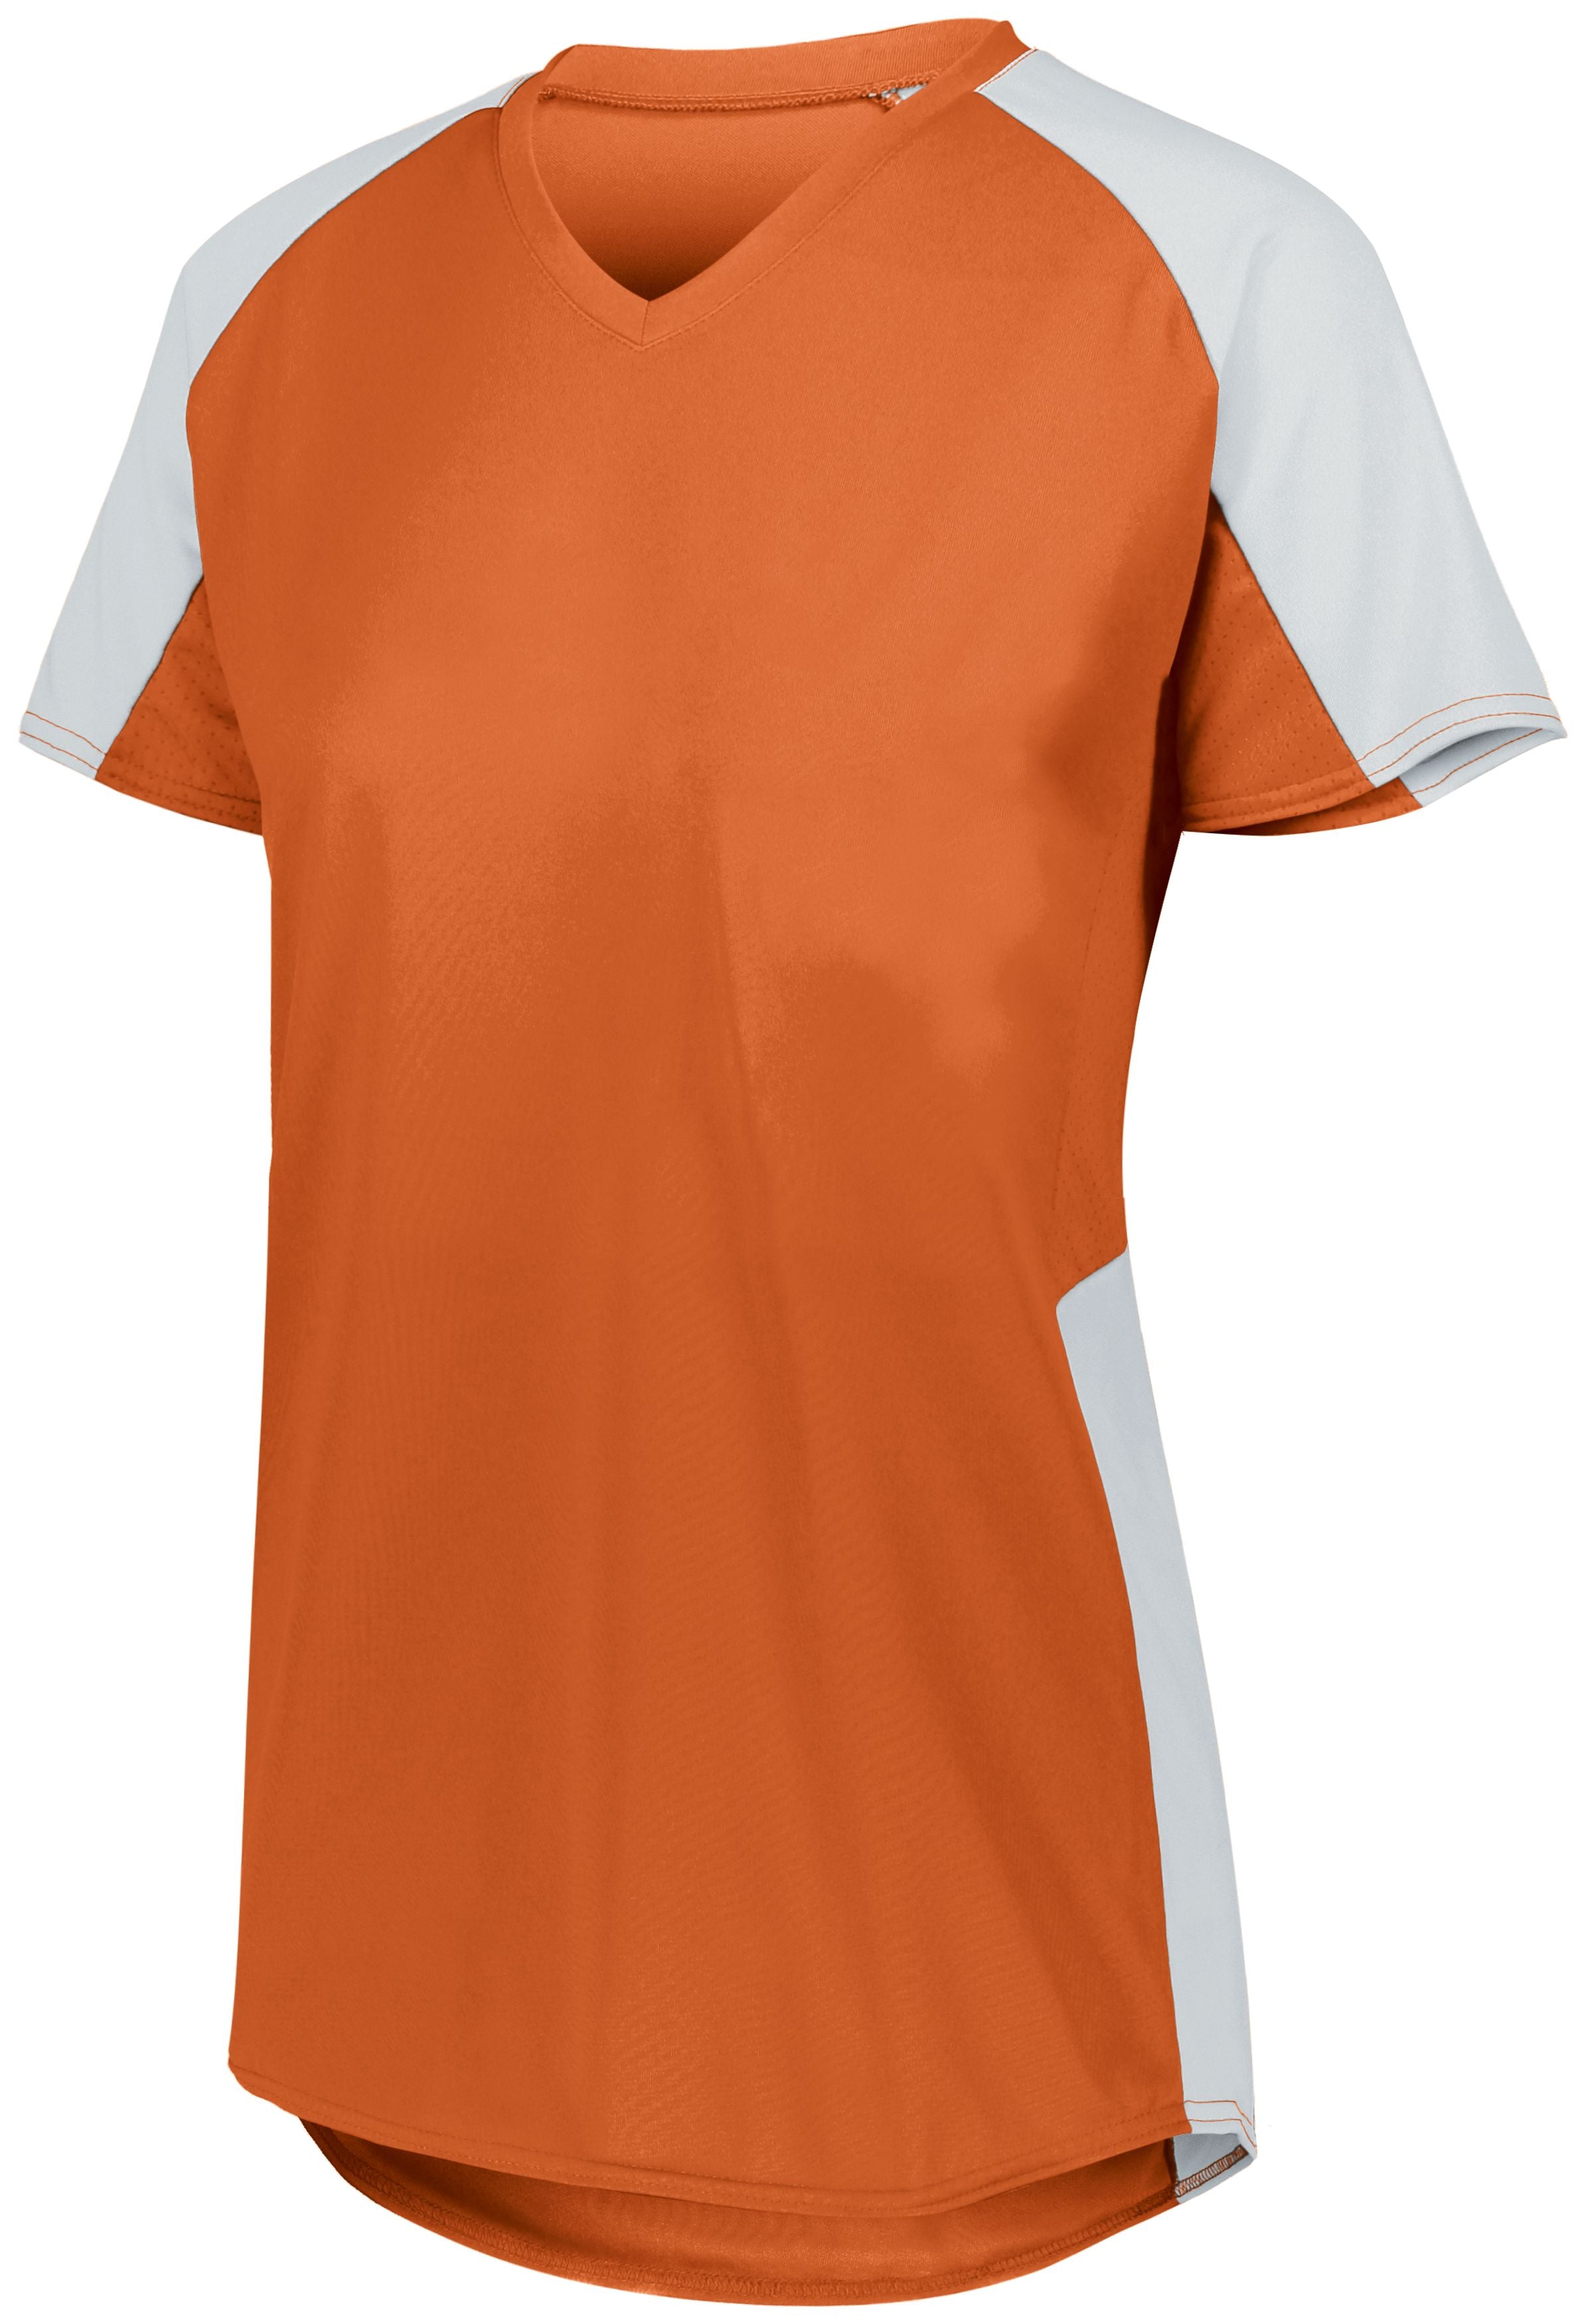 Augusta Sportswear Girls Cutter Jersey in Orange/White  -Part of the Girls, Augusta-Products, Softball, Girls-Jersey, Shirts product lines at KanaleyCreations.com